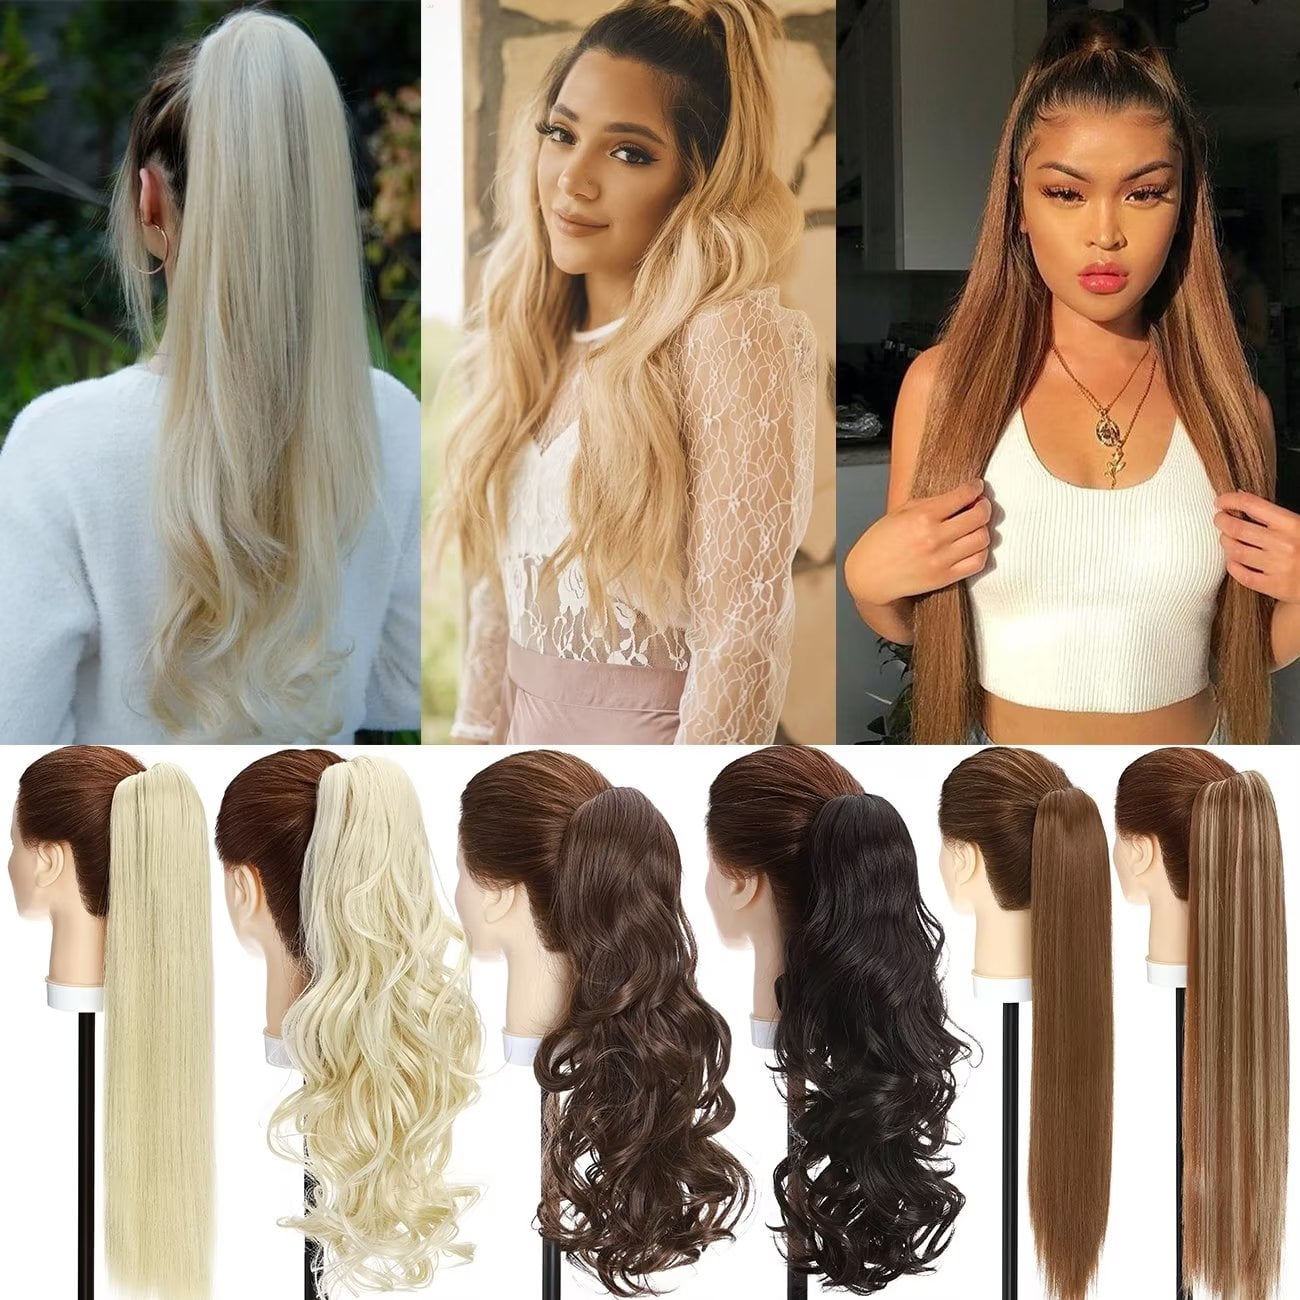 20 Inch Invisi Ponytail Beach Wave Barley Blonde | Beauty Works